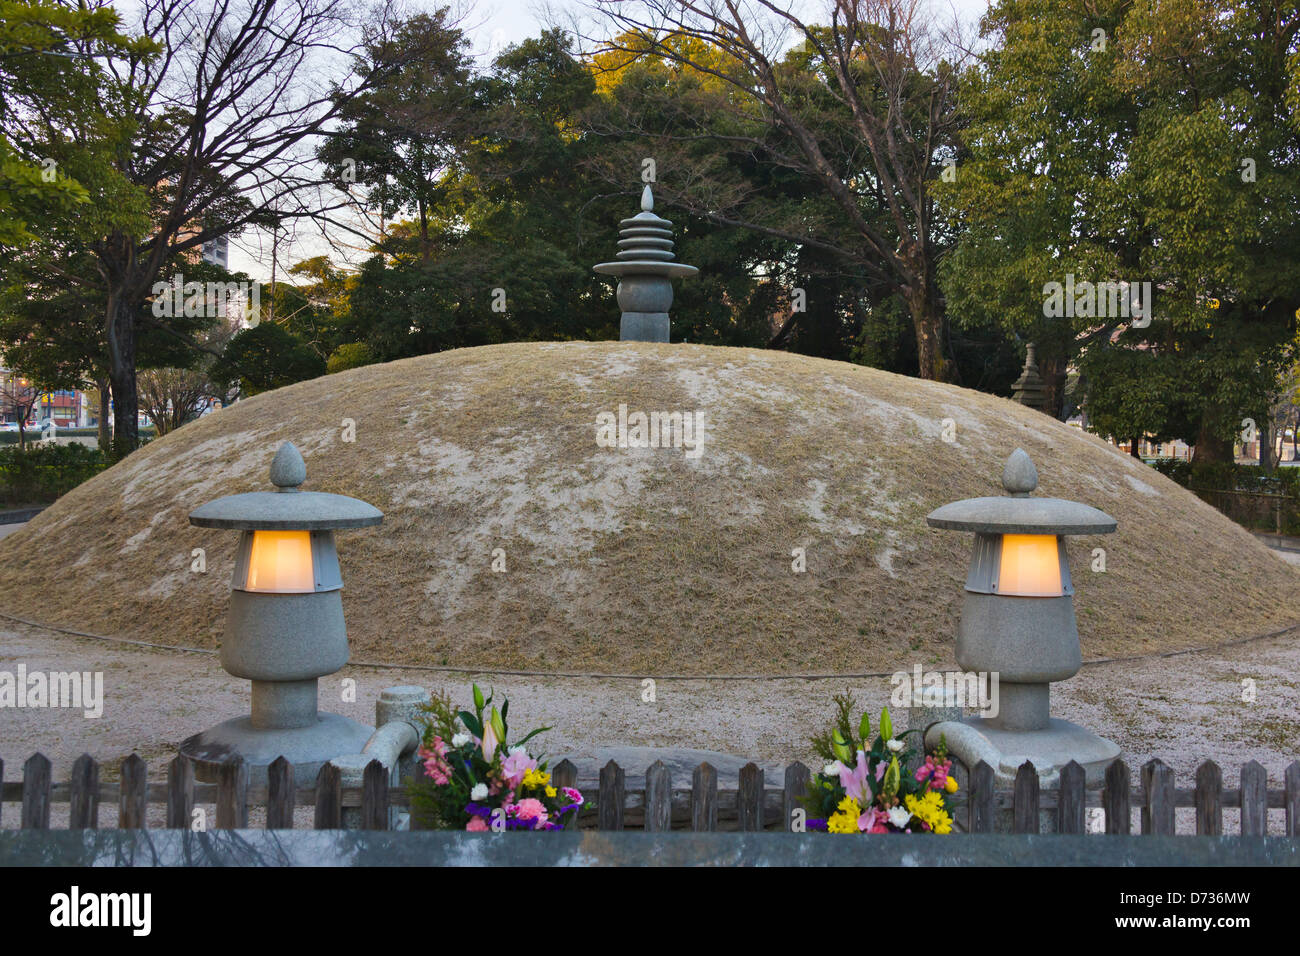 A-Bomb Memorial Mound containing the ashes of 70,000 unidentified victims of the bomb, Hiroshima, Japan Stock Photo